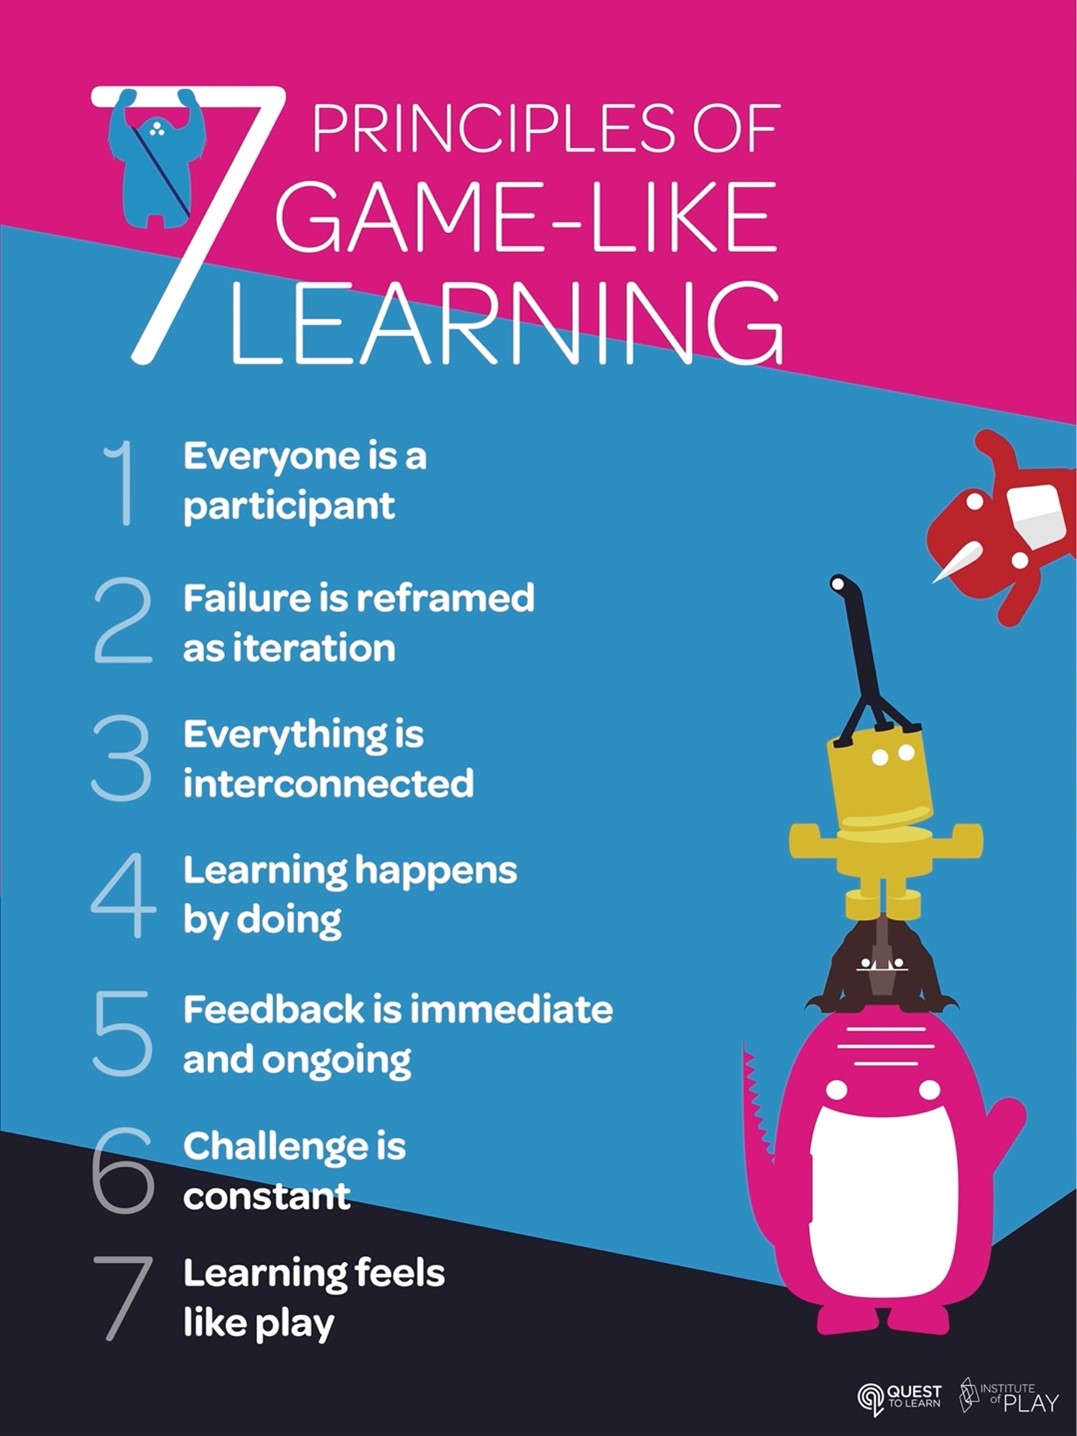 7 Principles of Game-Like Learning